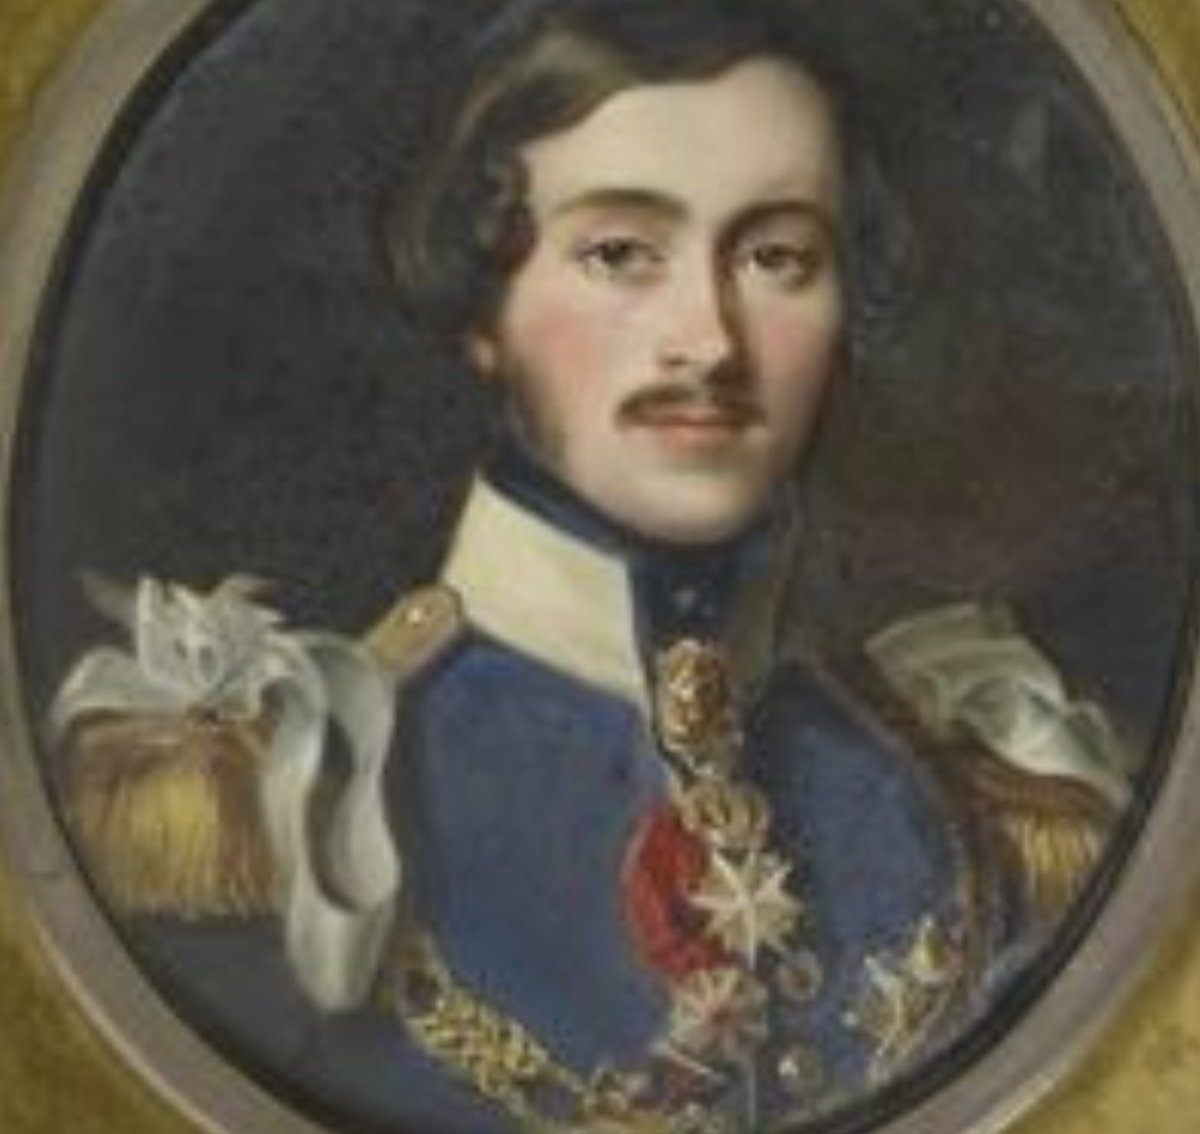 There is a long list, now, that supports Albert as the antichrist. For example- "deception." It's a hallmark of his coming. And Prince Albert was born of his uncle Leopold, King of Belgium, to ensure Victoria got the crown and married Albert. His brother (L) wore matching hair...